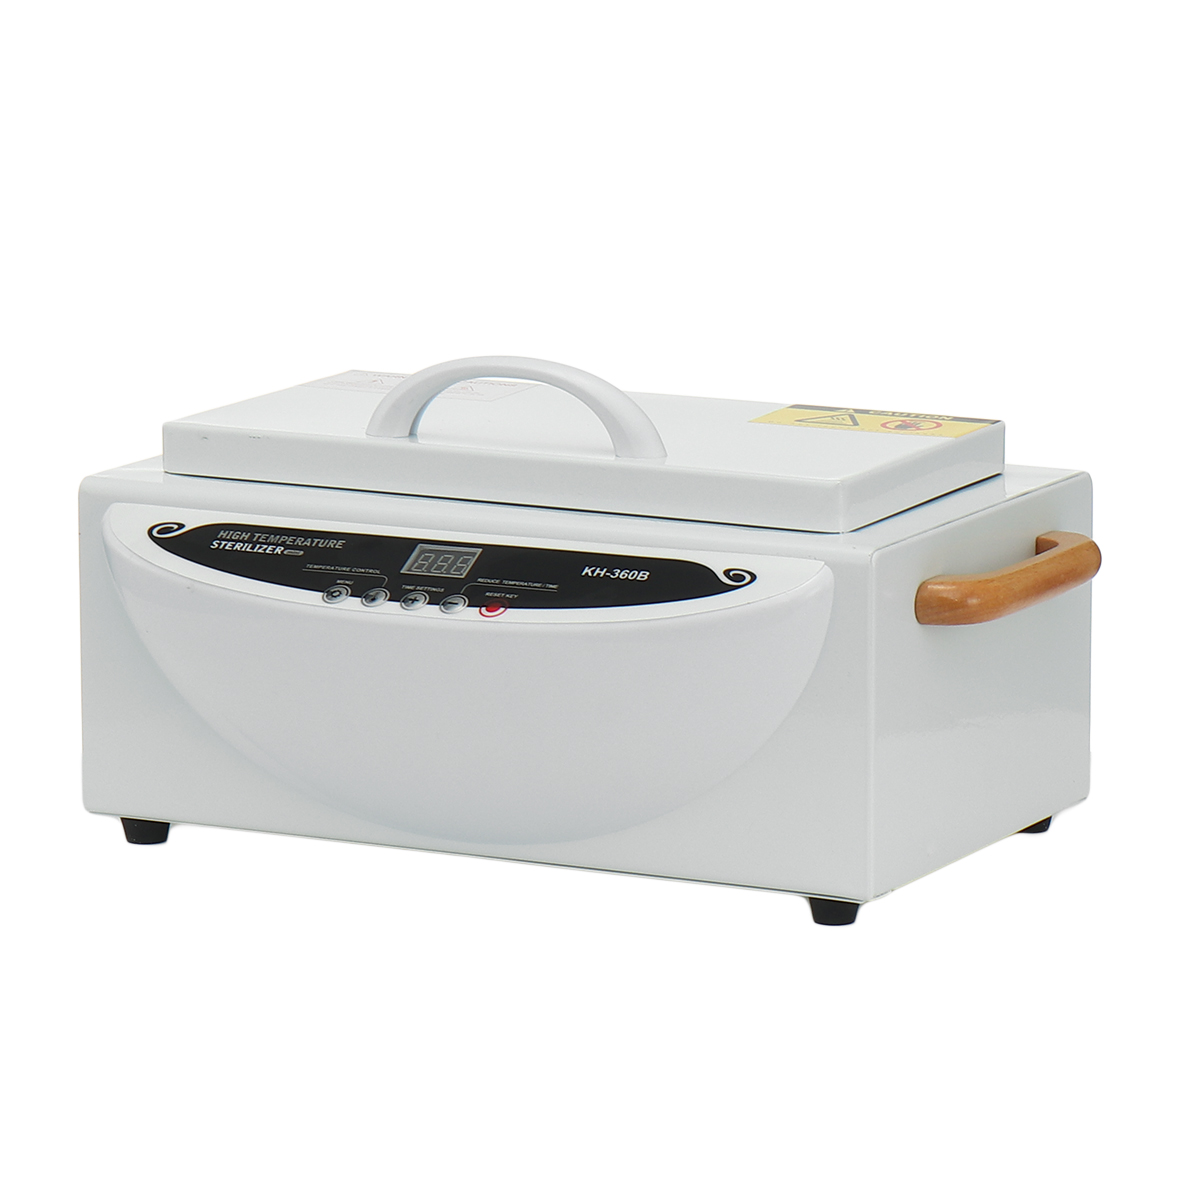 500W-110220V-Spa-Sterilizer-Beauty-Manicure-Nail-Tool-Cabinet-Disinfection-Box-1679830-7